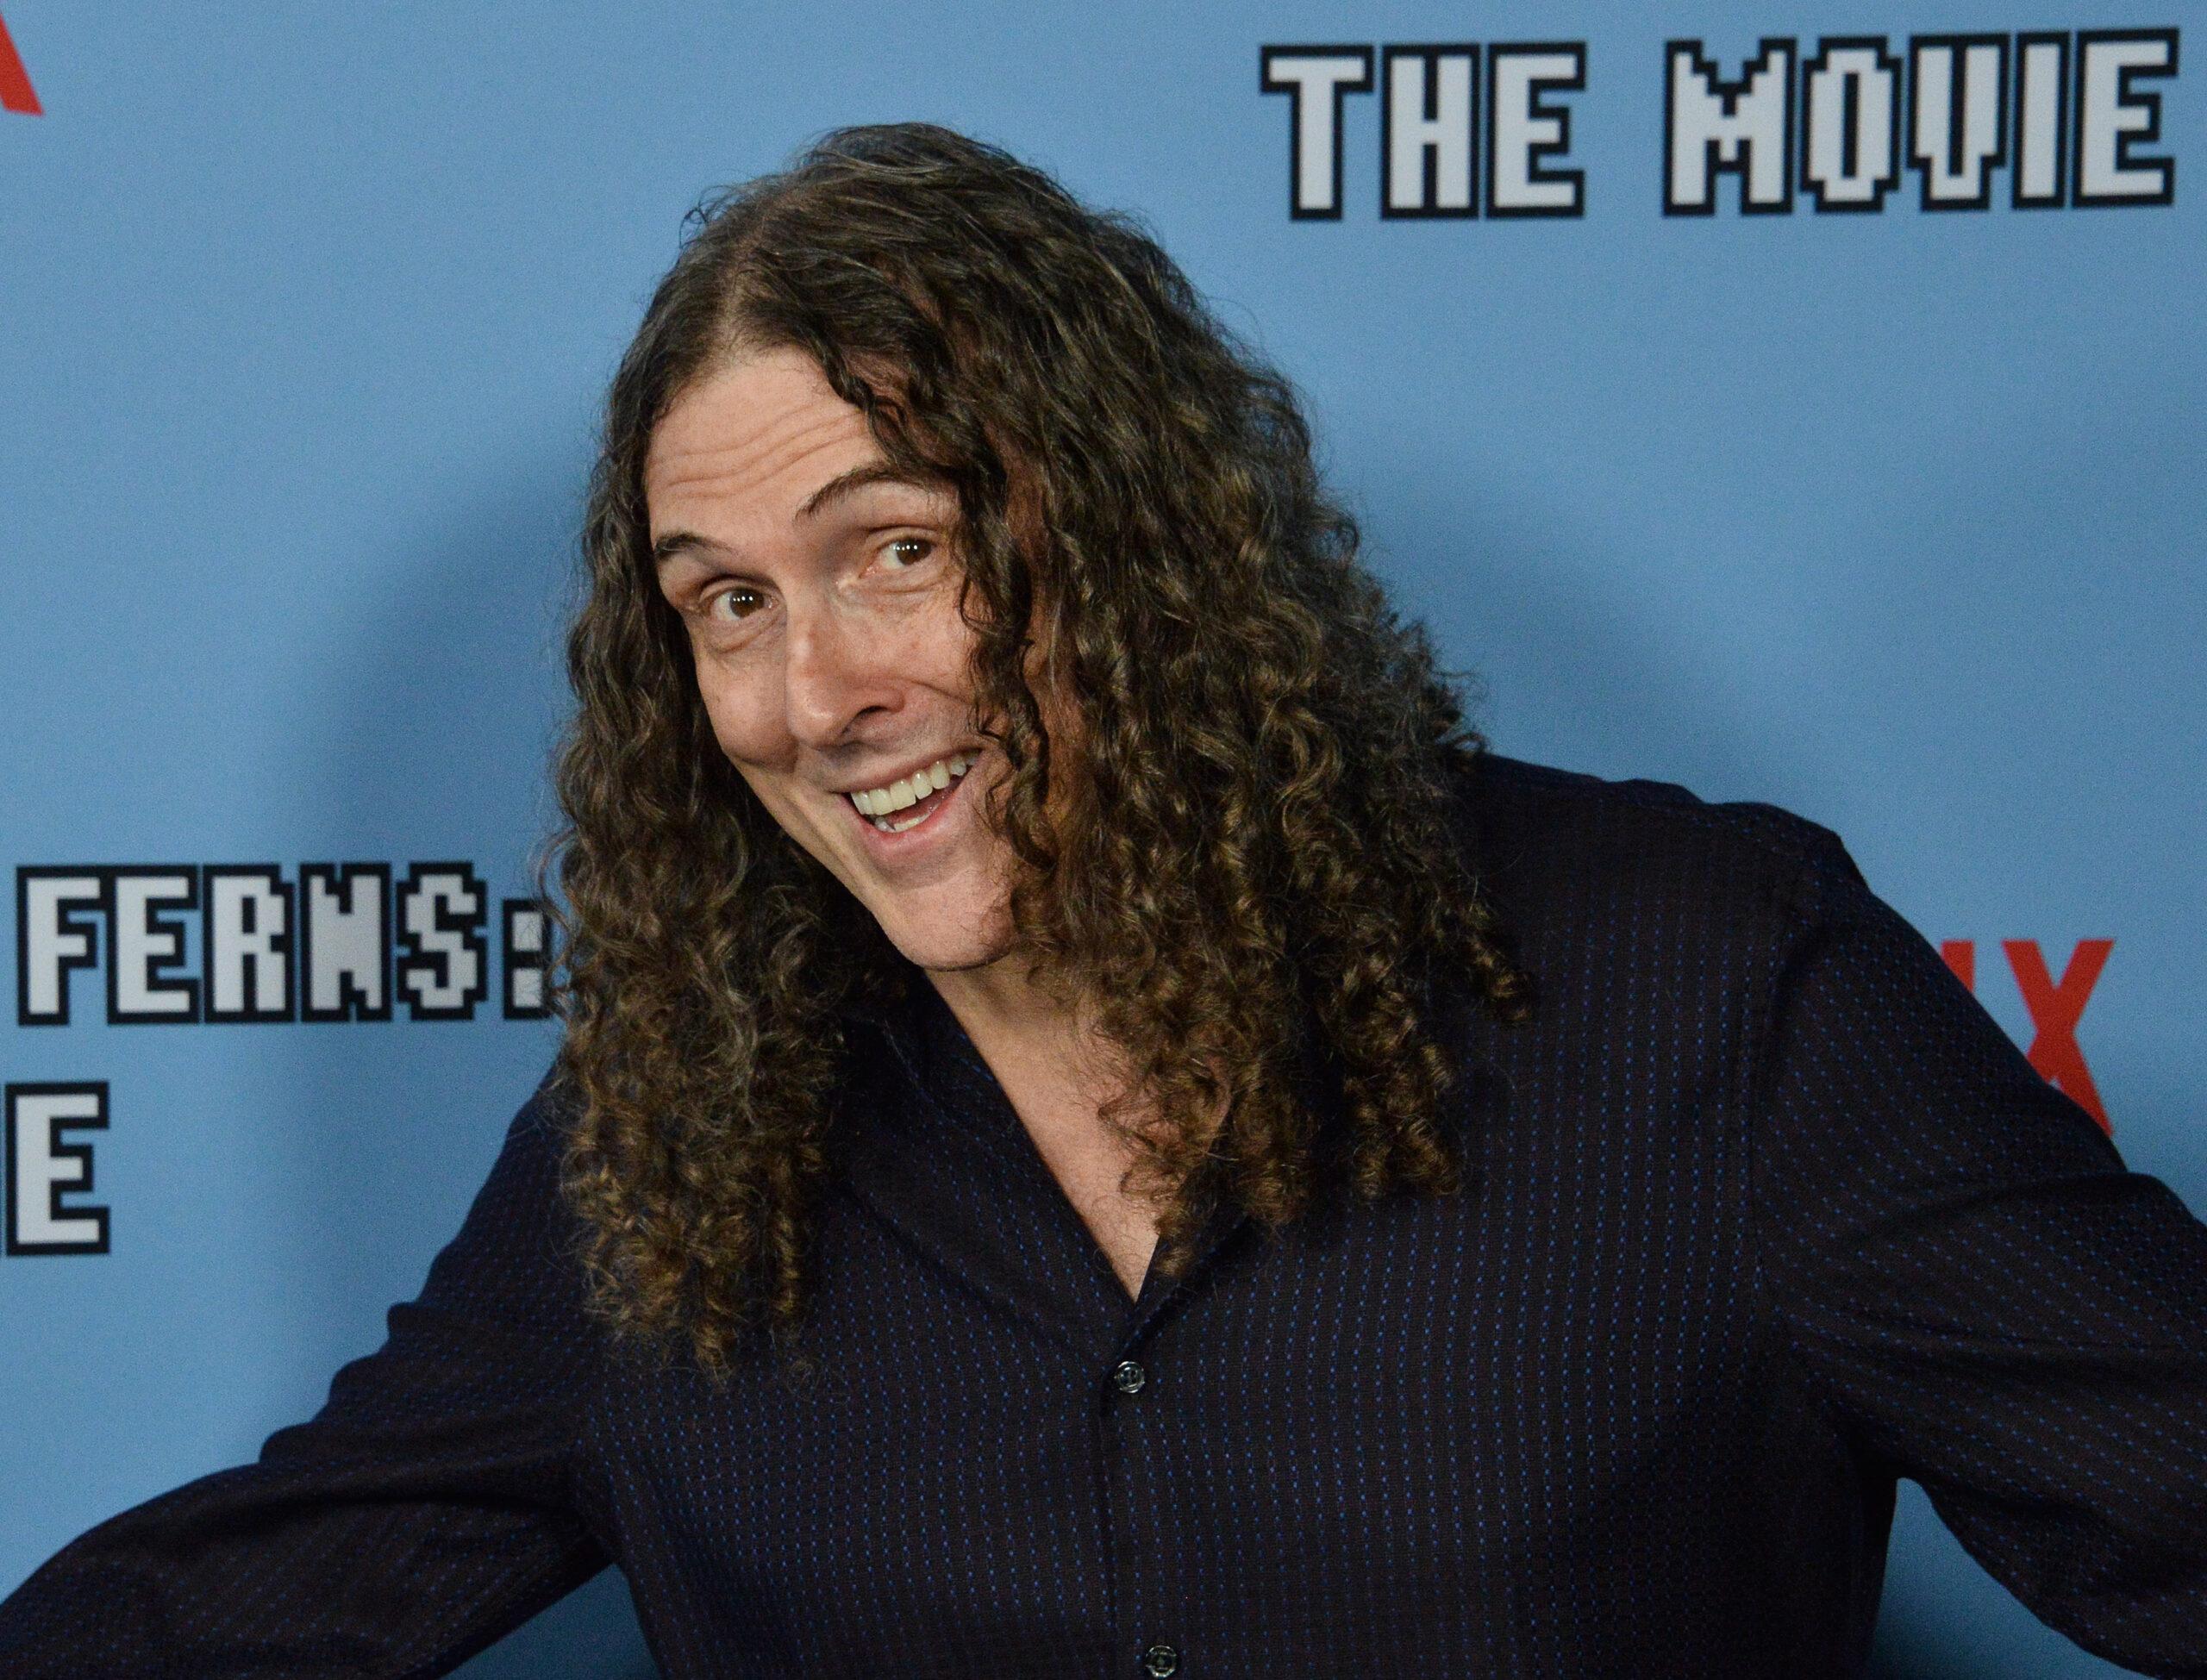 "Weird Al" Yankovic attends the premiere of the motion picture comedy "Between Two Ferns: The Movie" 